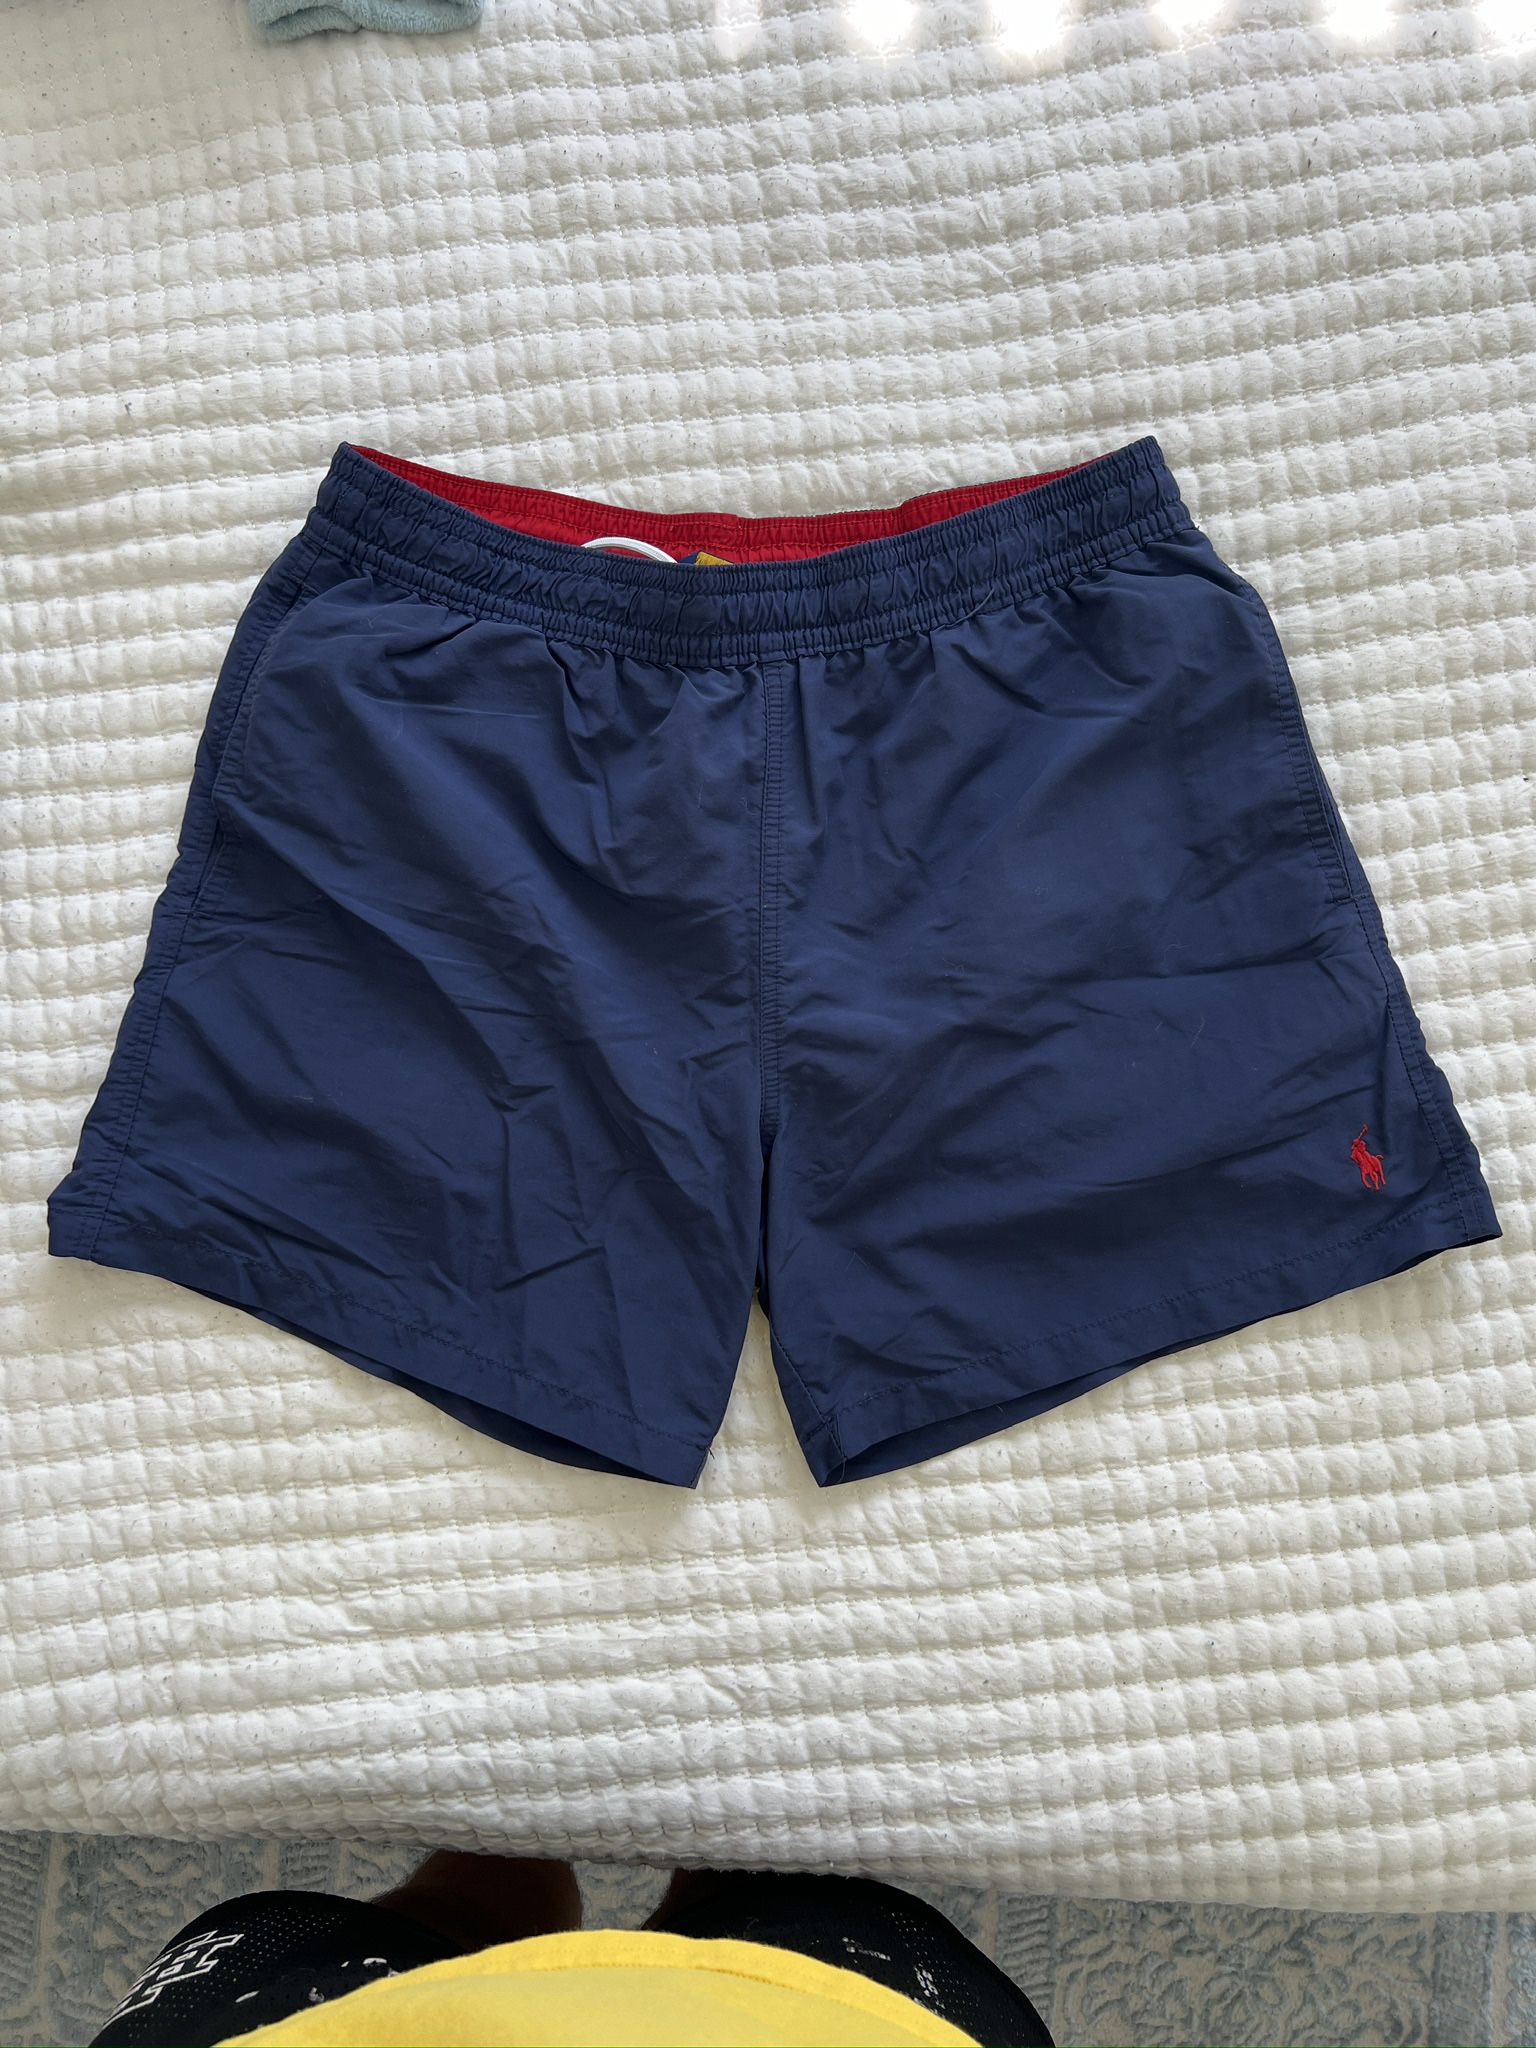 Navy Blue Polo Ralph Lauren swimming shorts size large